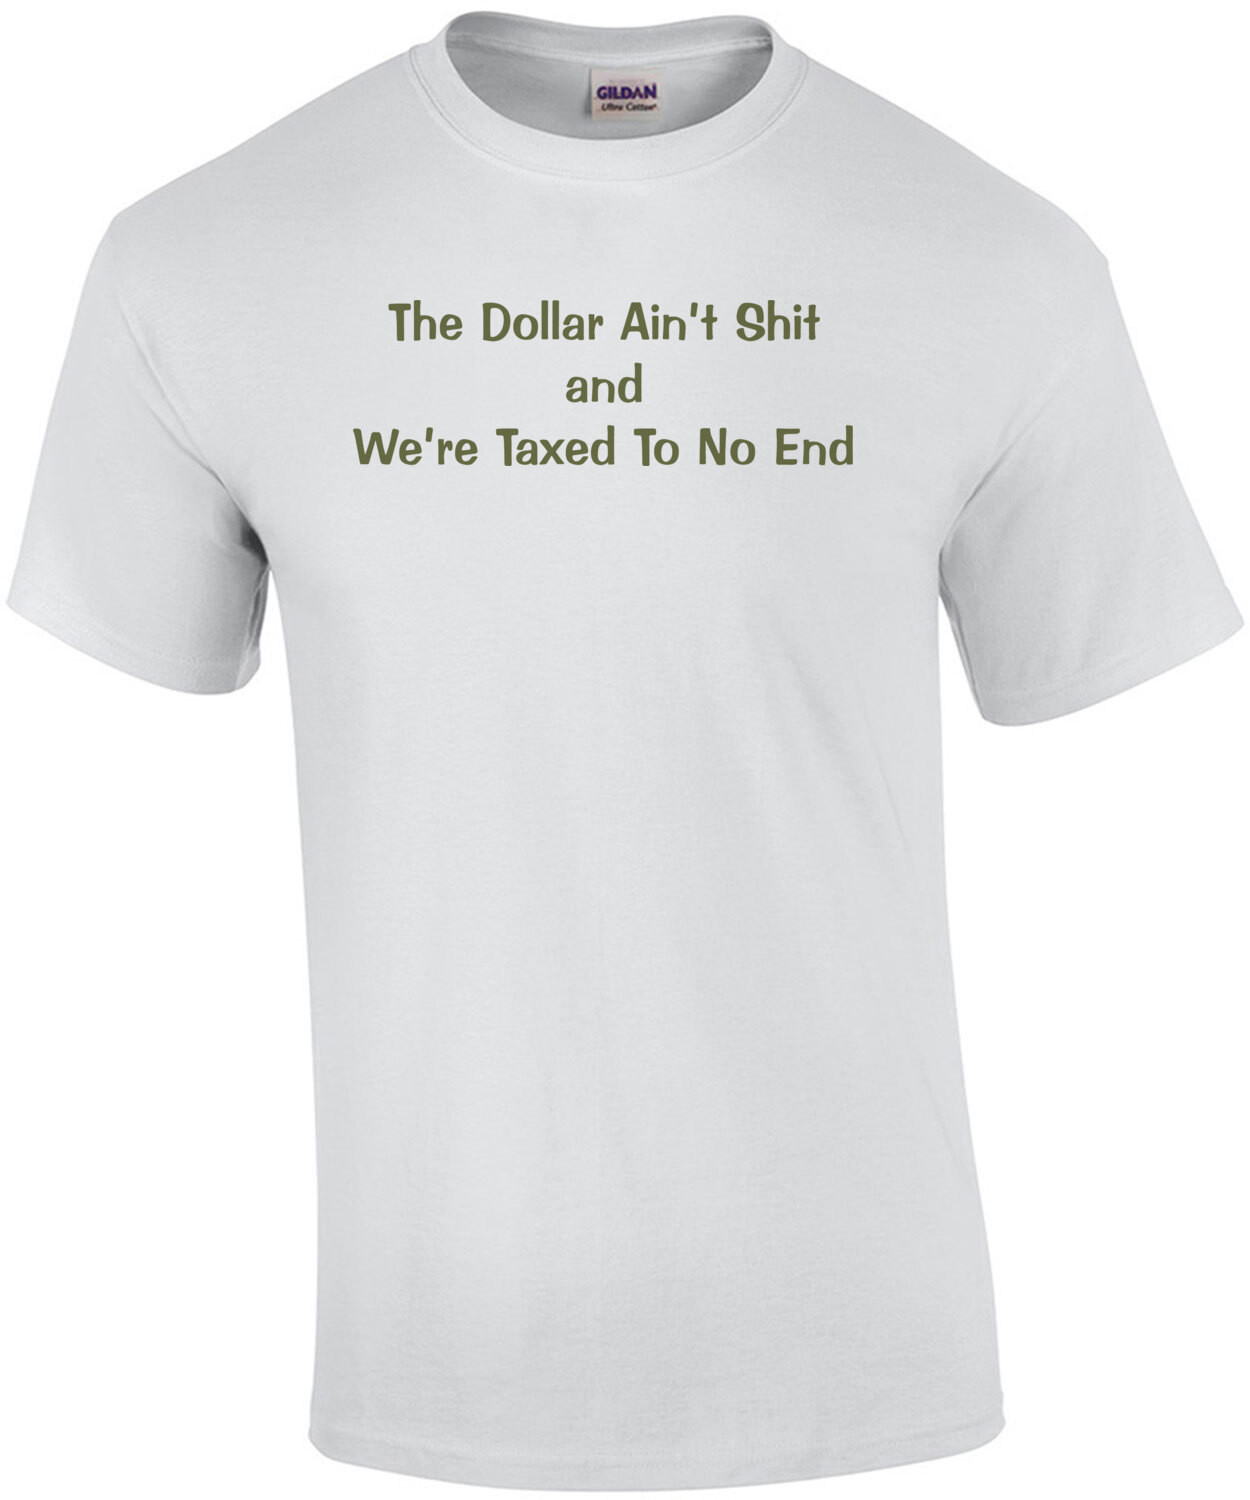 The Dollar Ain't Shirt and We're Taxed To No End Political T-Shirt